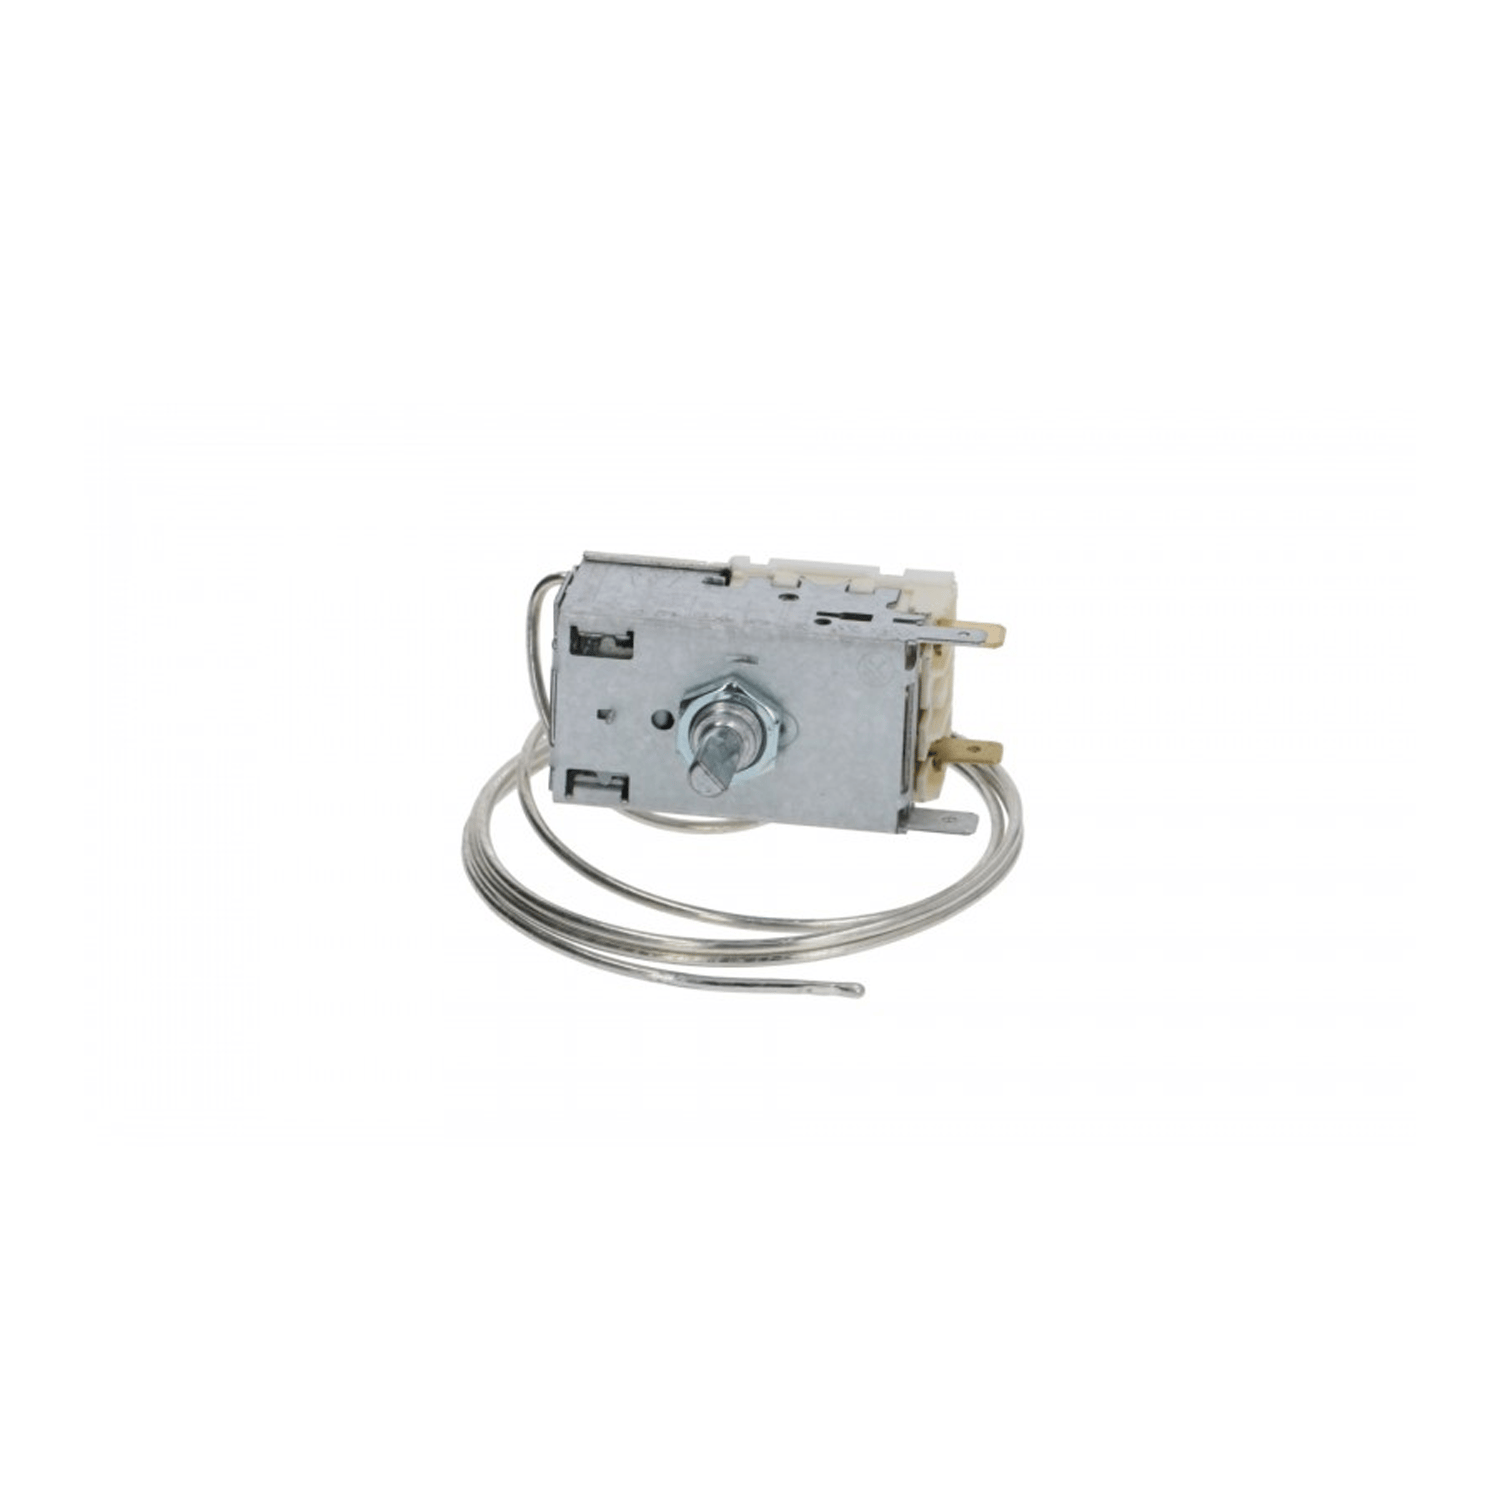 THERMOSTAT RANCO K50-L3212 (modified version),, 2 contacts 6A 250V, capillary tube: 800 mm